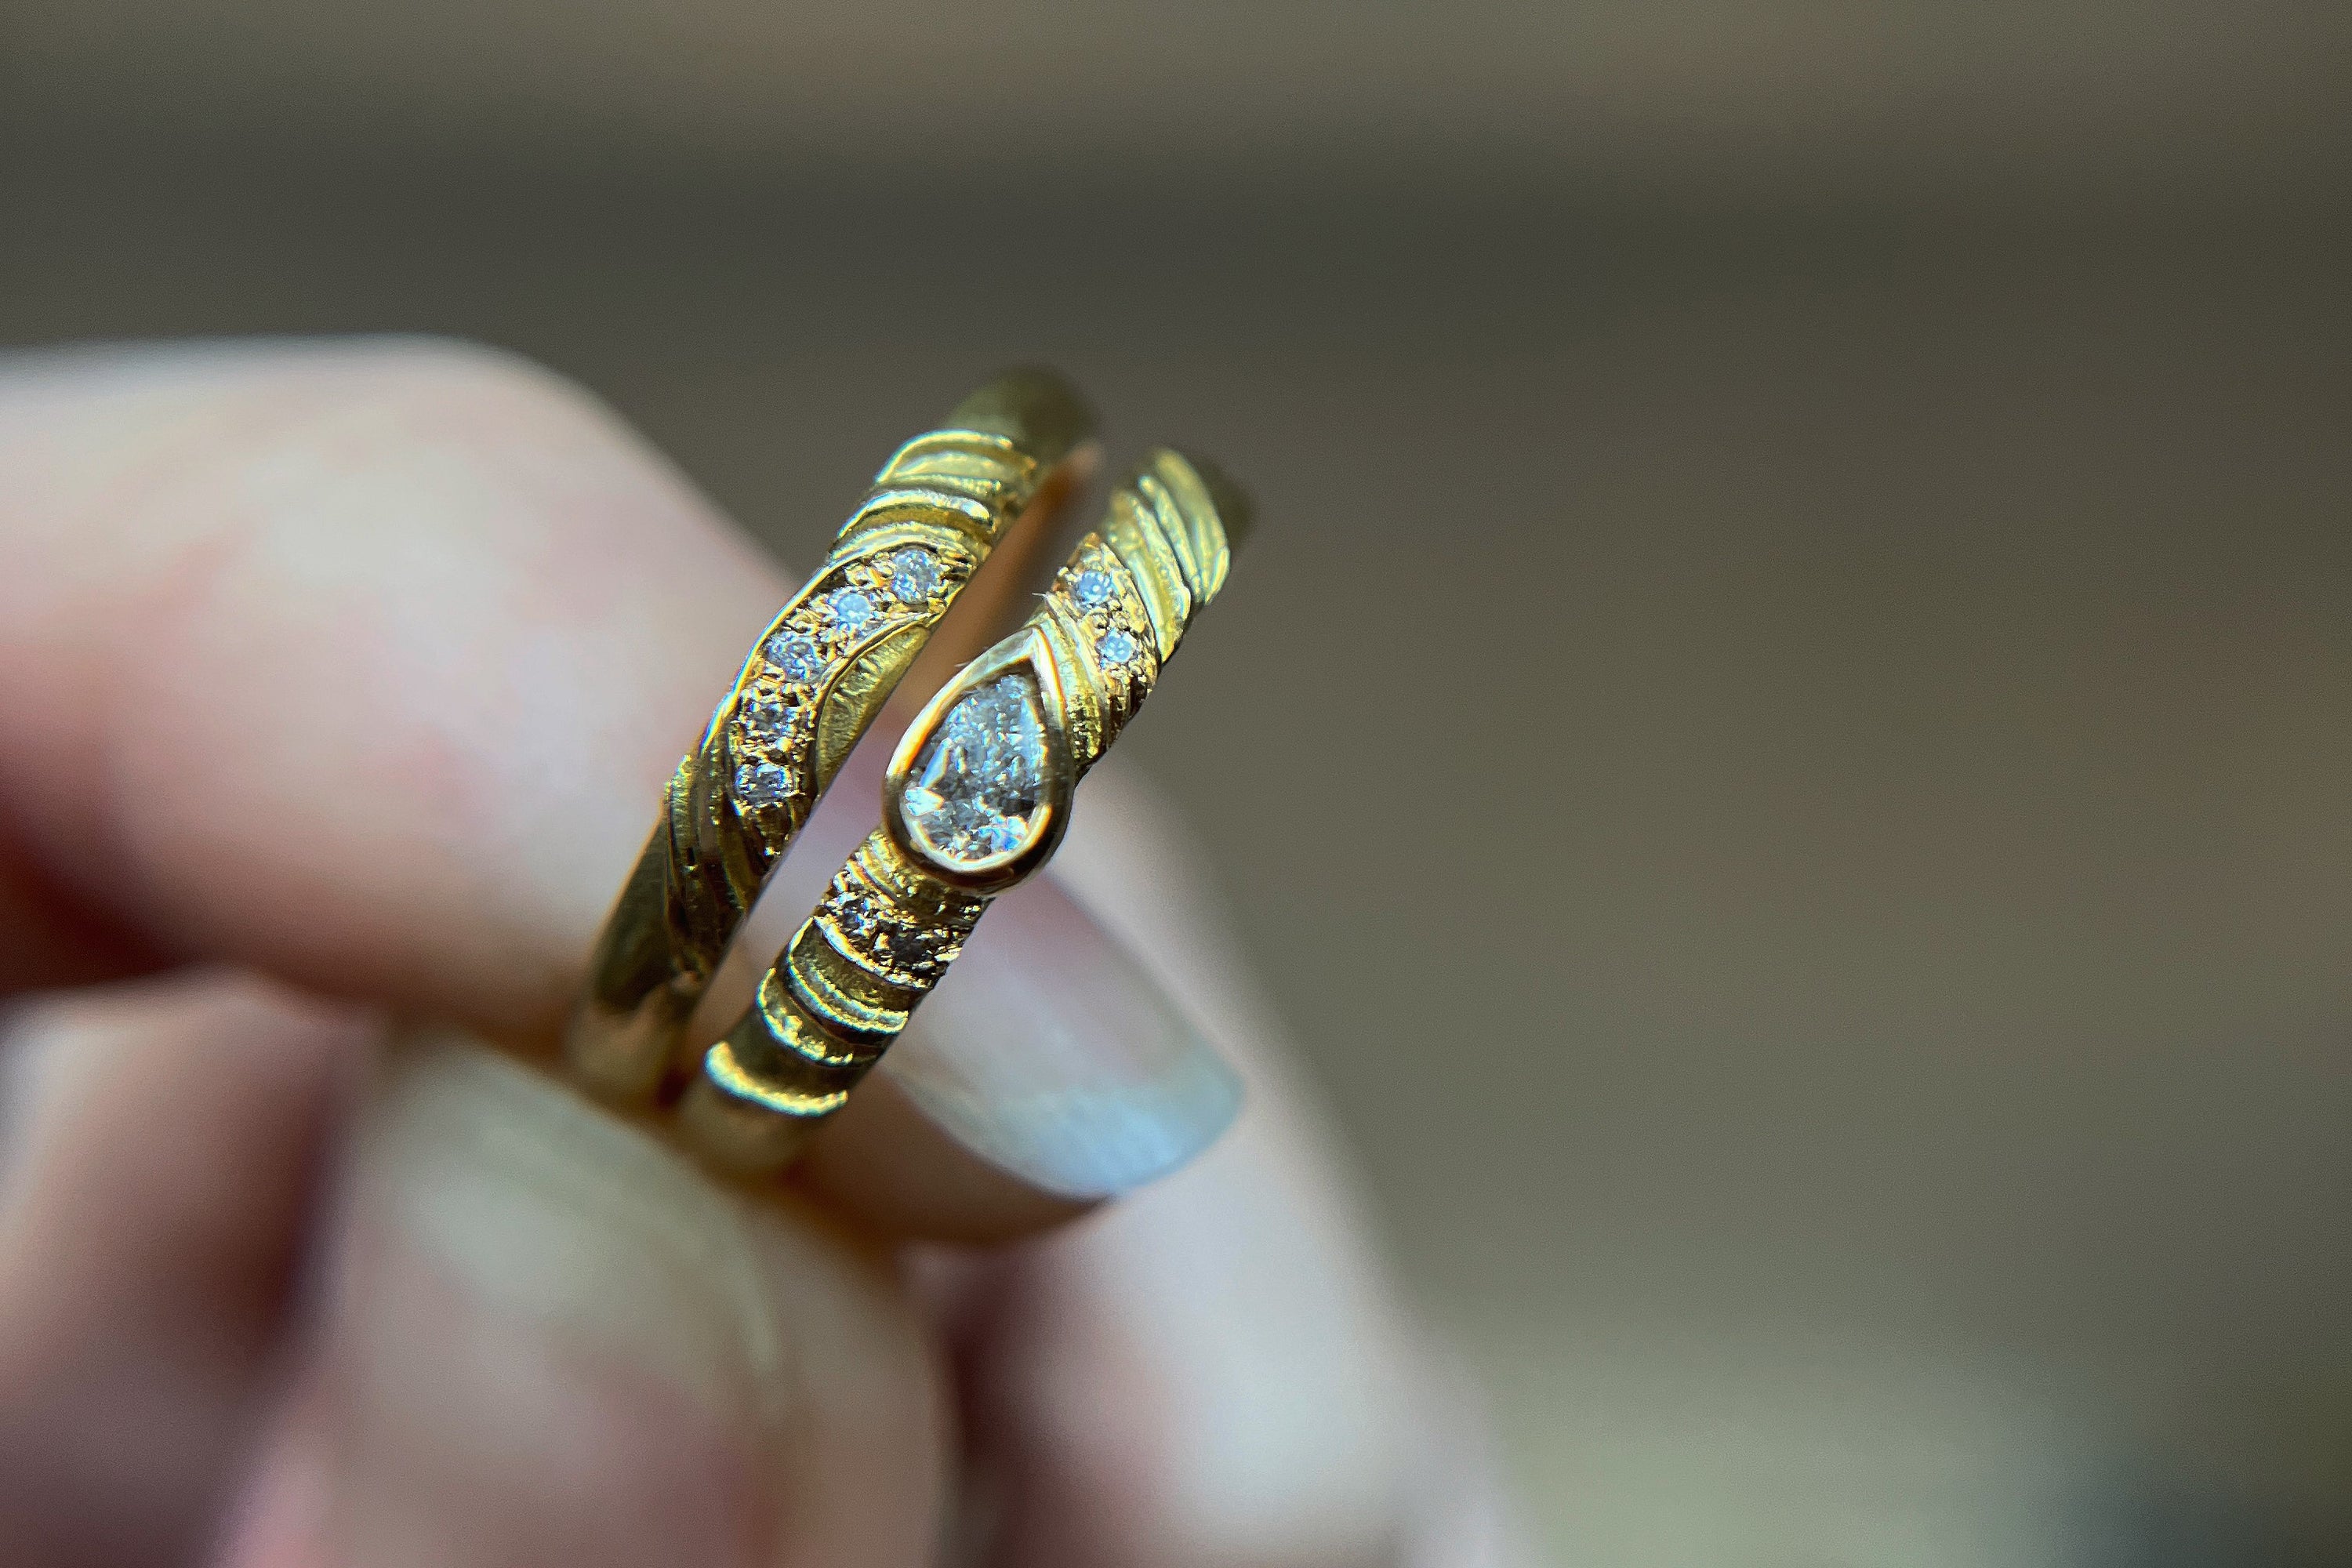 Two handmade bespoke gold wedding rings being held by independent jeweller Claire Macfarlane